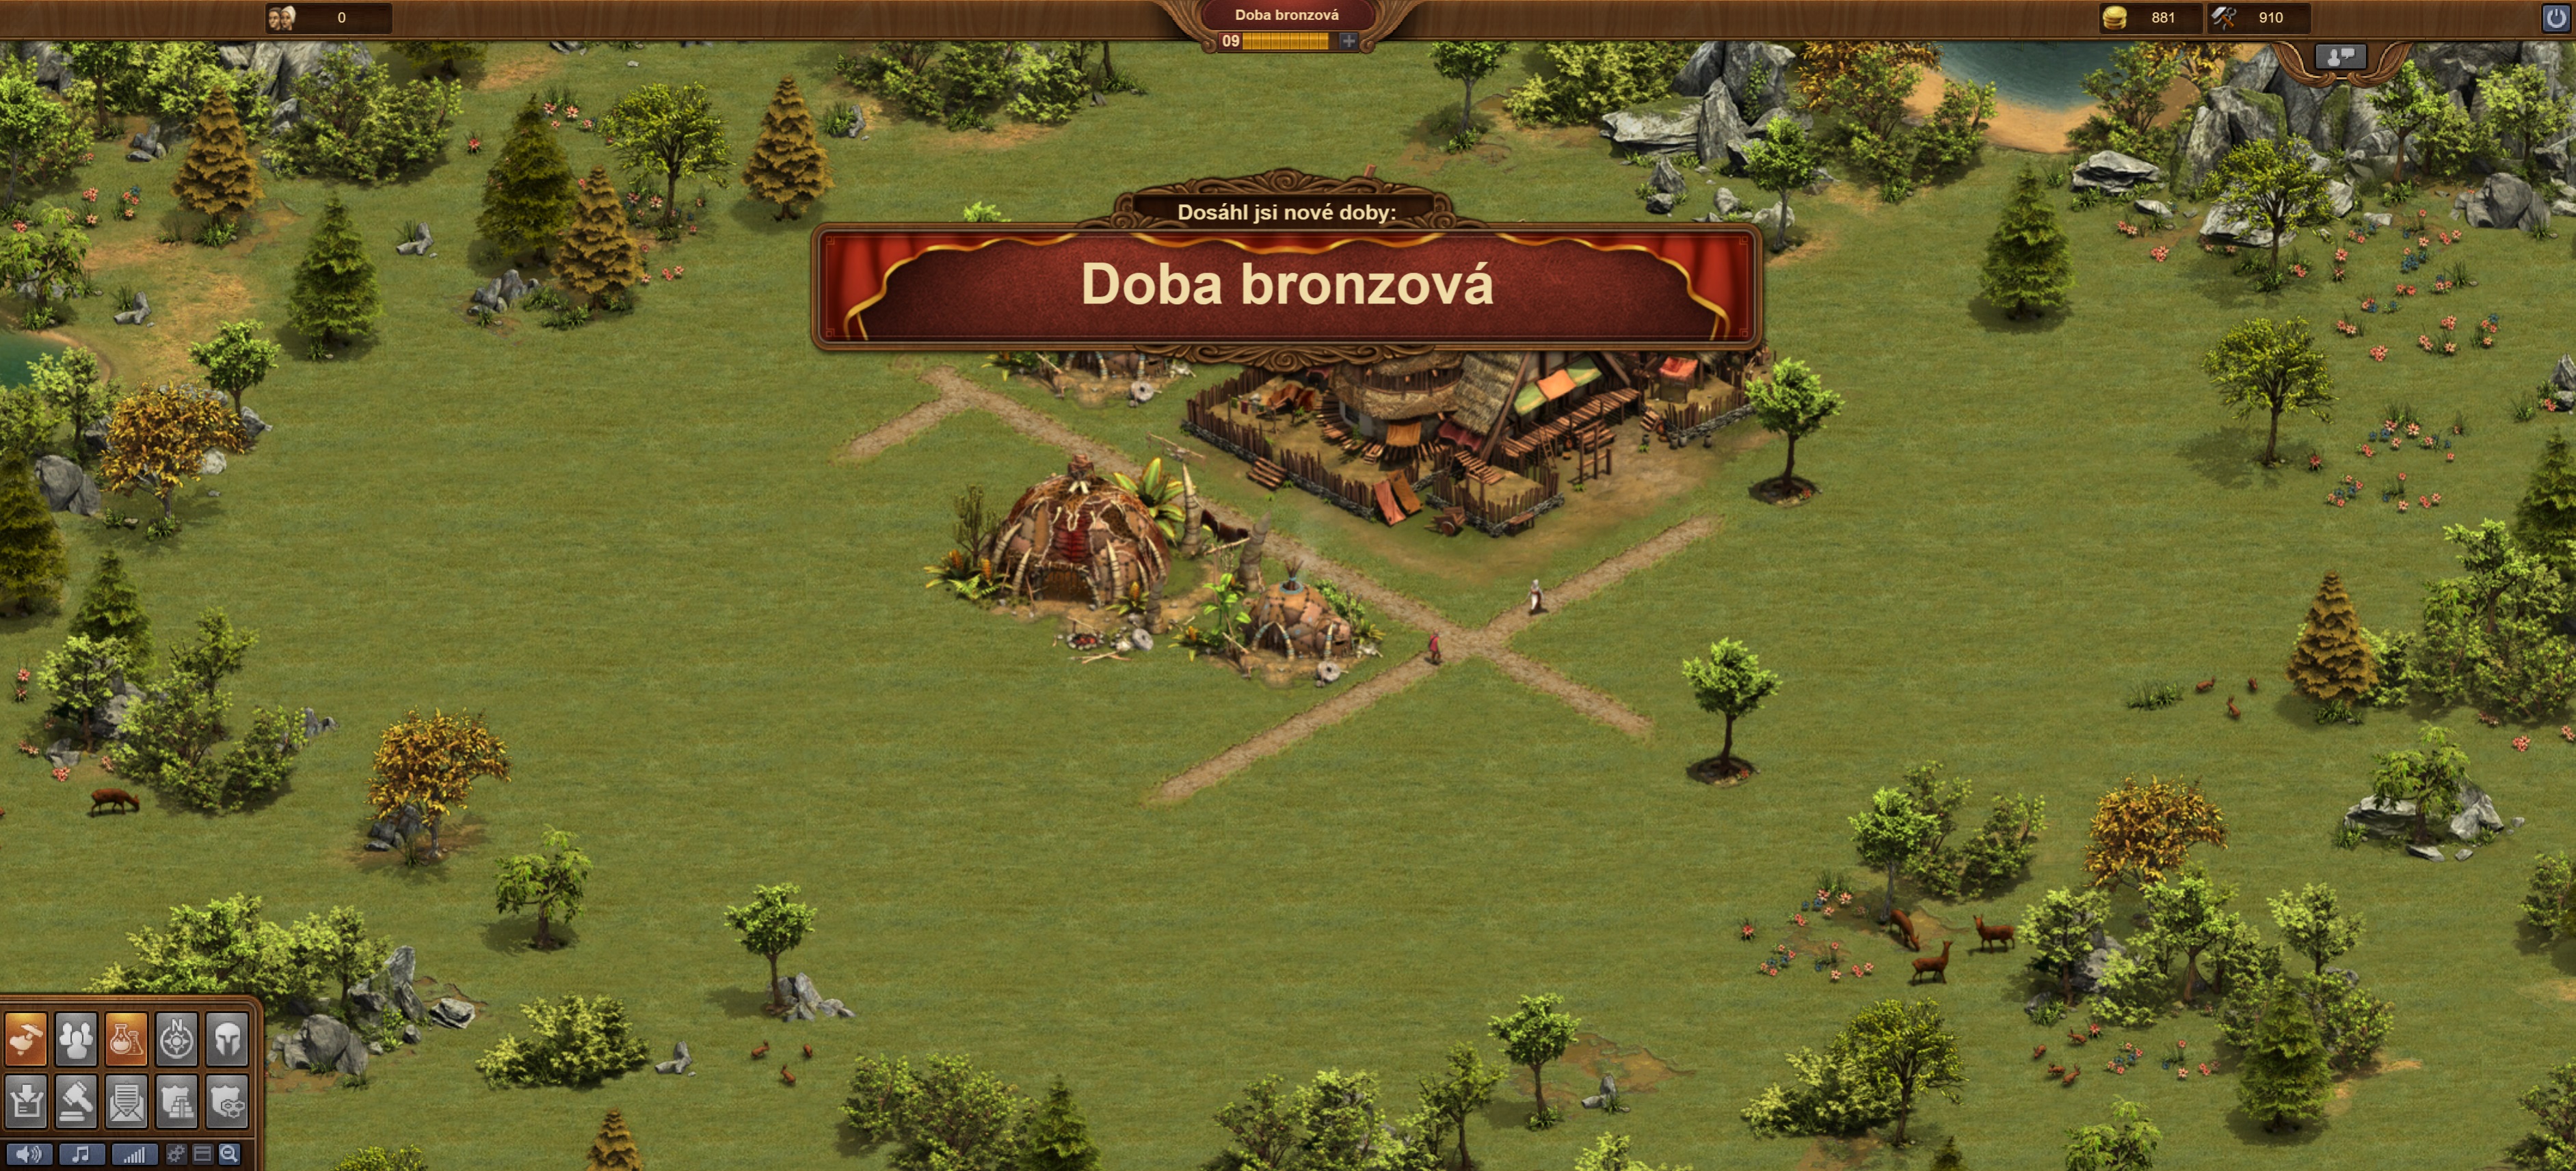 forge of empires how to get people into your tavern